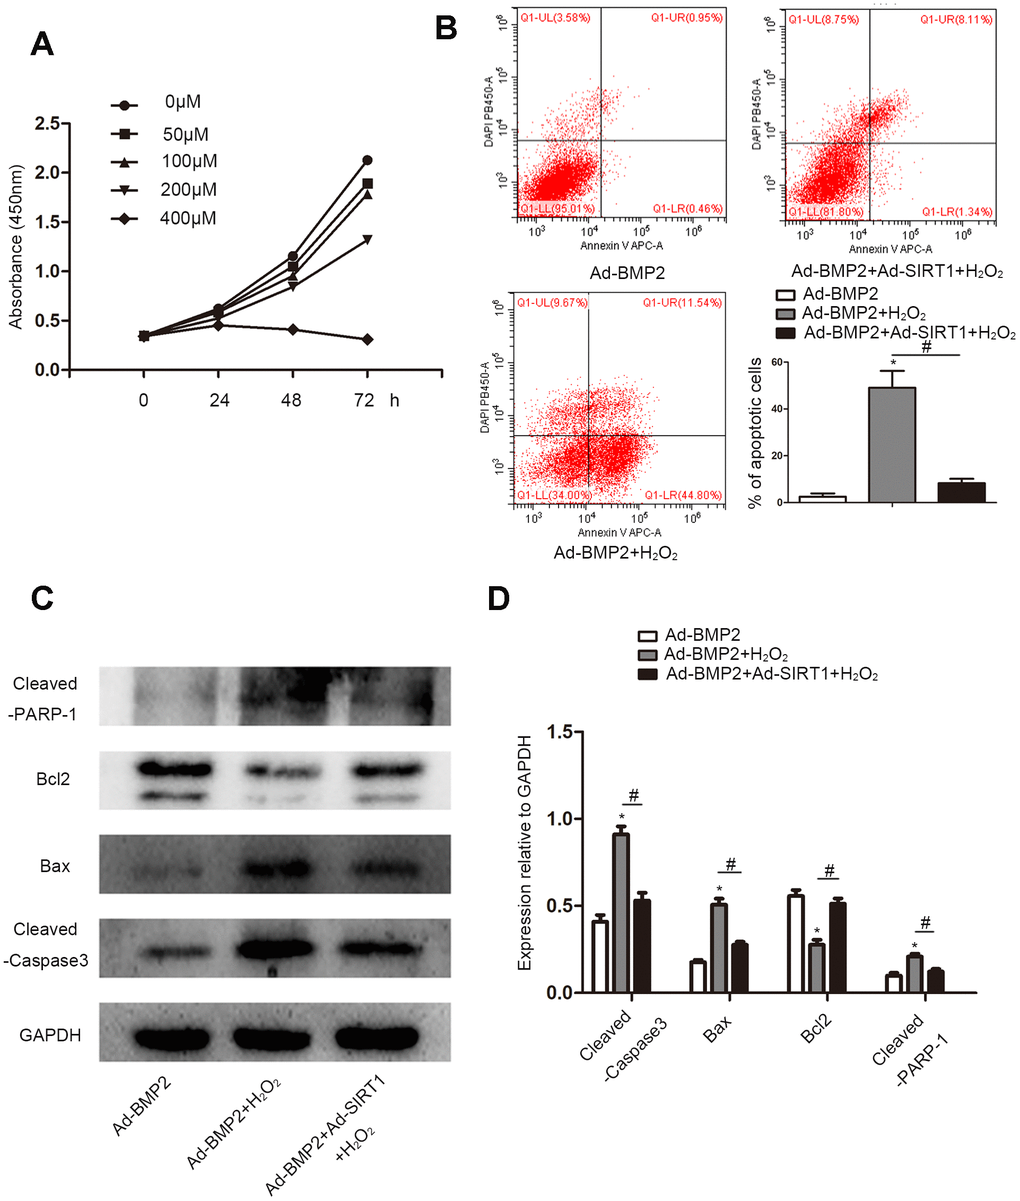 SIRT1 alleviated the apoptosis of BMP2-induced chondrogenic differentiation stem cells under oxidative stress. (A) Cell Counting Kit-8 assay to detect cell proliferation under different concentrations (0, 50, 100, 200, or 400 μM) of H2O2. (B) The cell apoptotic rates were measured using a flow cytometry assay under 200 μM of H2O2. (C, D) H2O2 increased the expression of Cleaved-Caspase3, Bax, and Cleaved-PARP-1 and reduce the expression of Bcl-2 compare to the control group. The Ad-BMP2+Ad-SIRT1+H2O2 group exhibited opposite results. The data are denoted as the mean ± SD.*: p 2O2 vs. Ad-BMP2; #: p 2O2 vs. Ad-BMP2+Ad-SIRT1+H2O2.